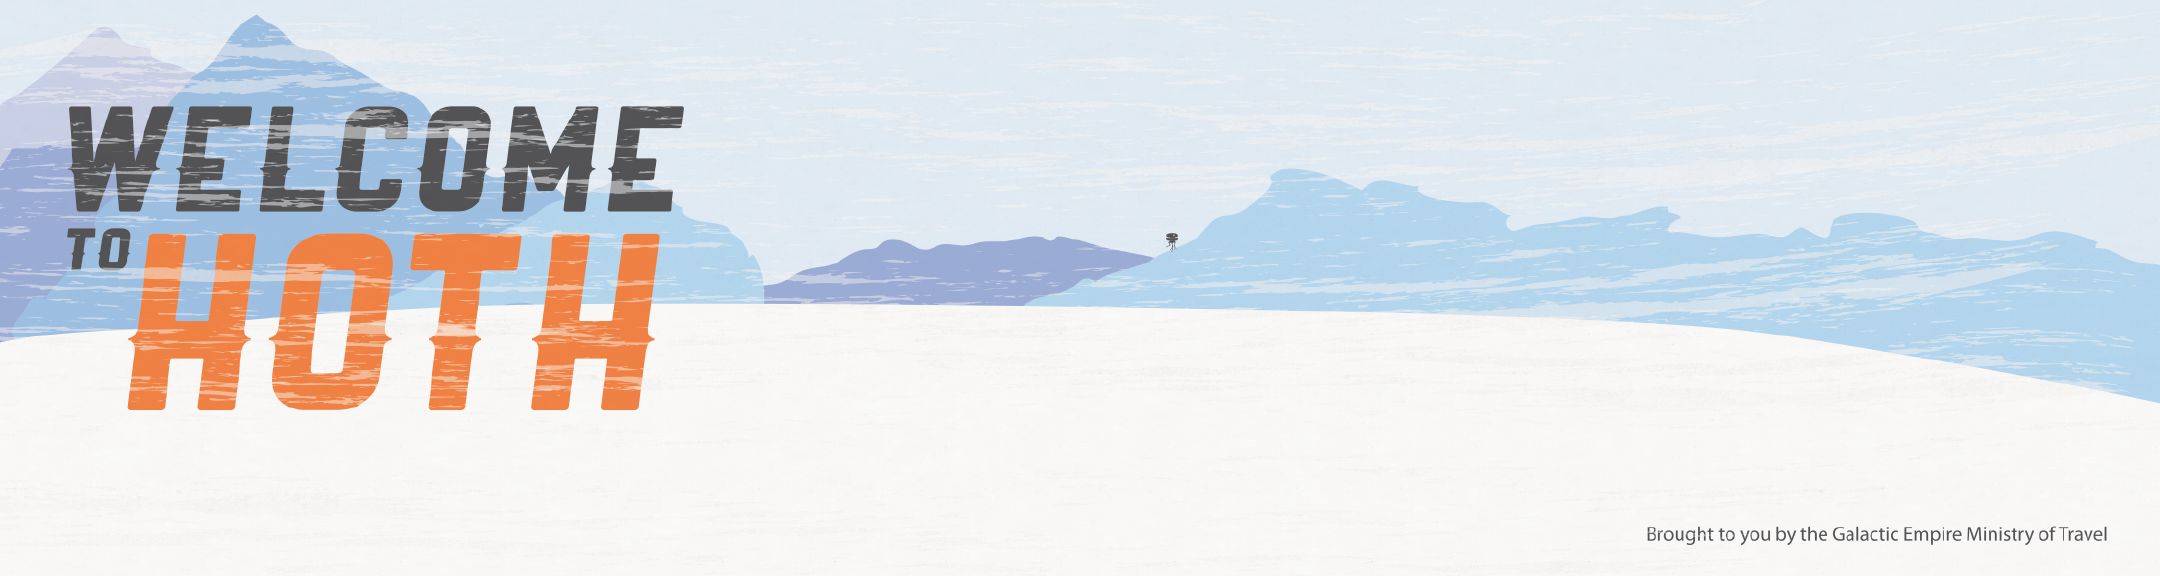 hoth-web-01.png